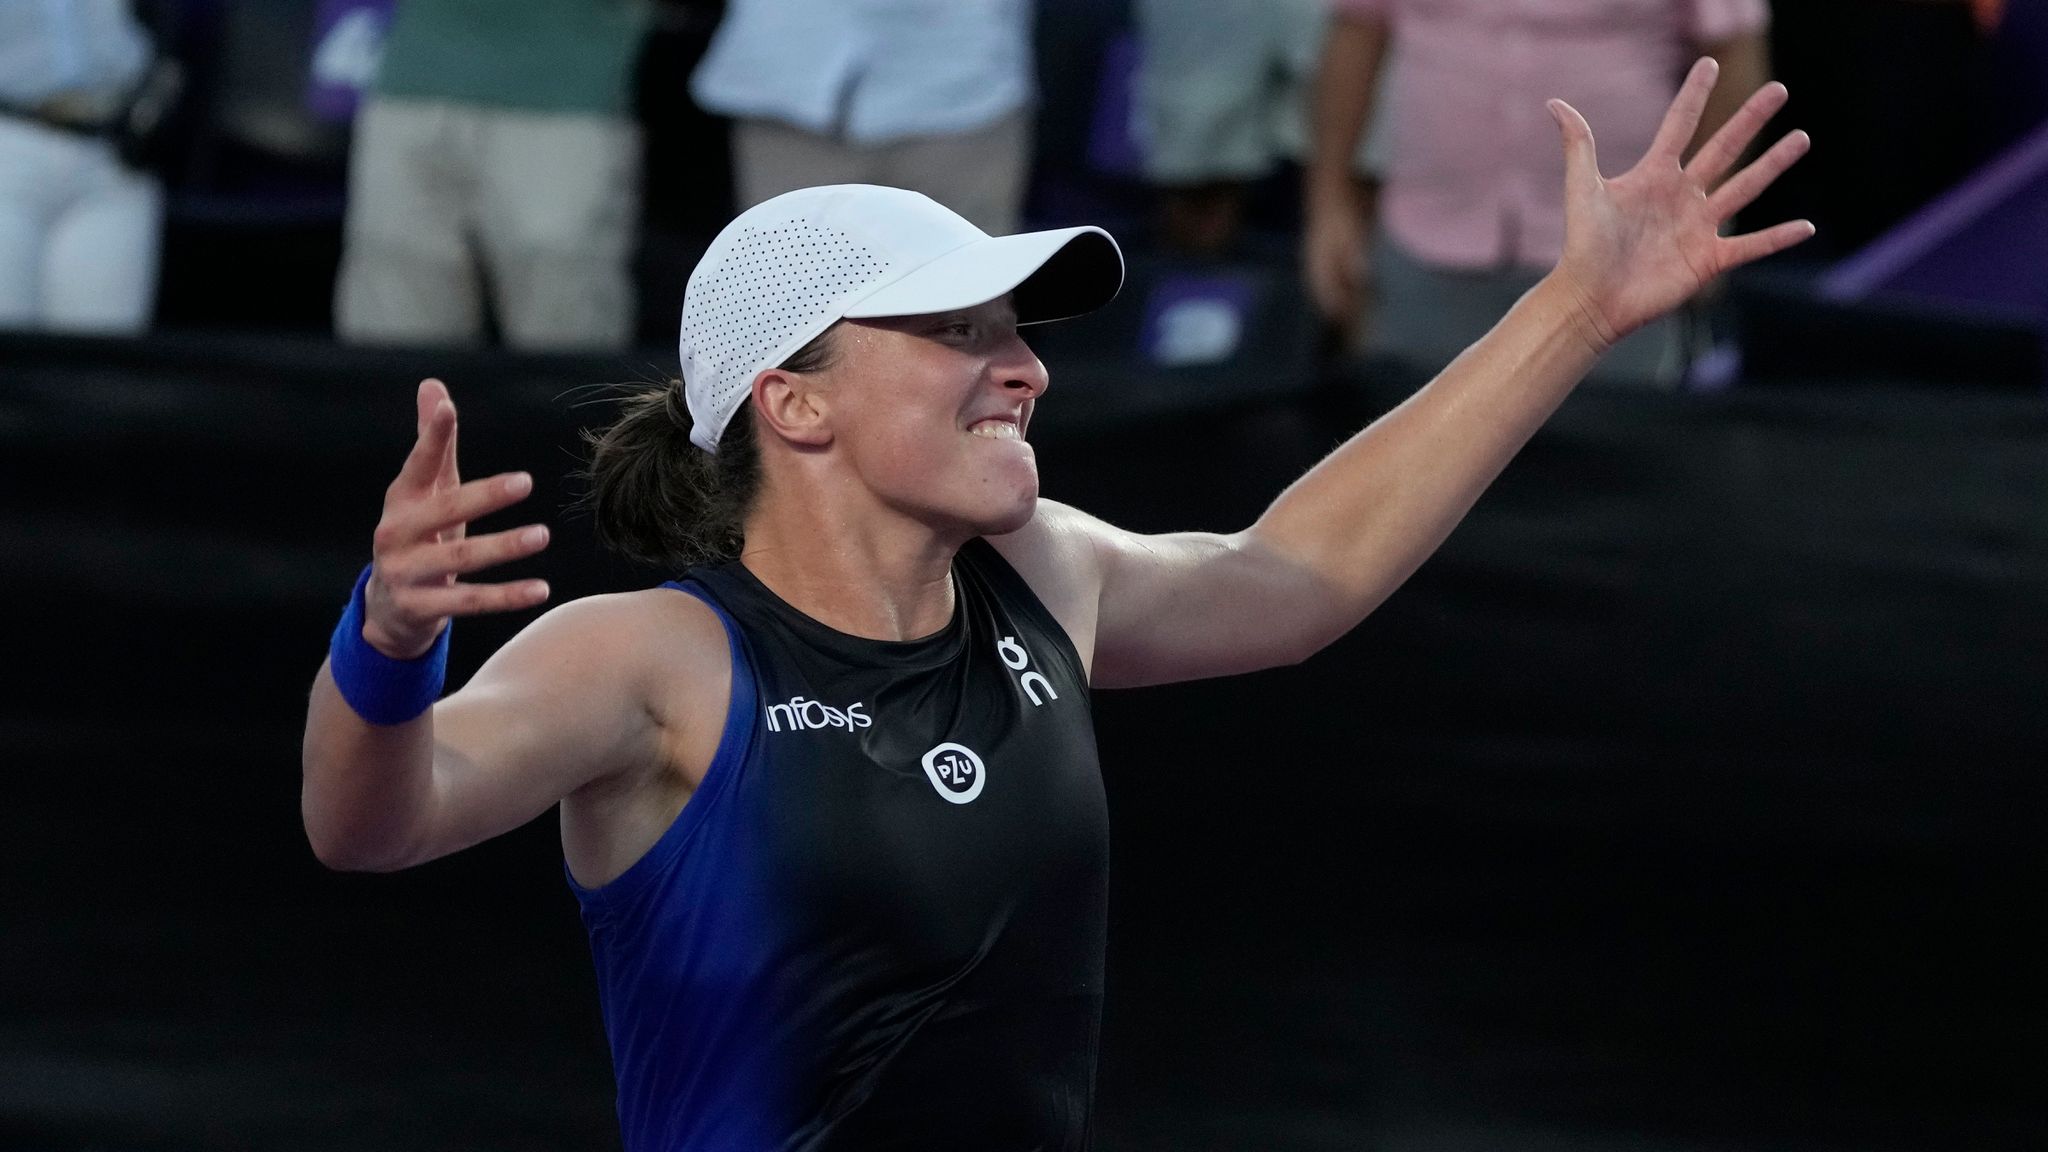 WTA Finals Iga Swiatek storms to glory with straightsets win over